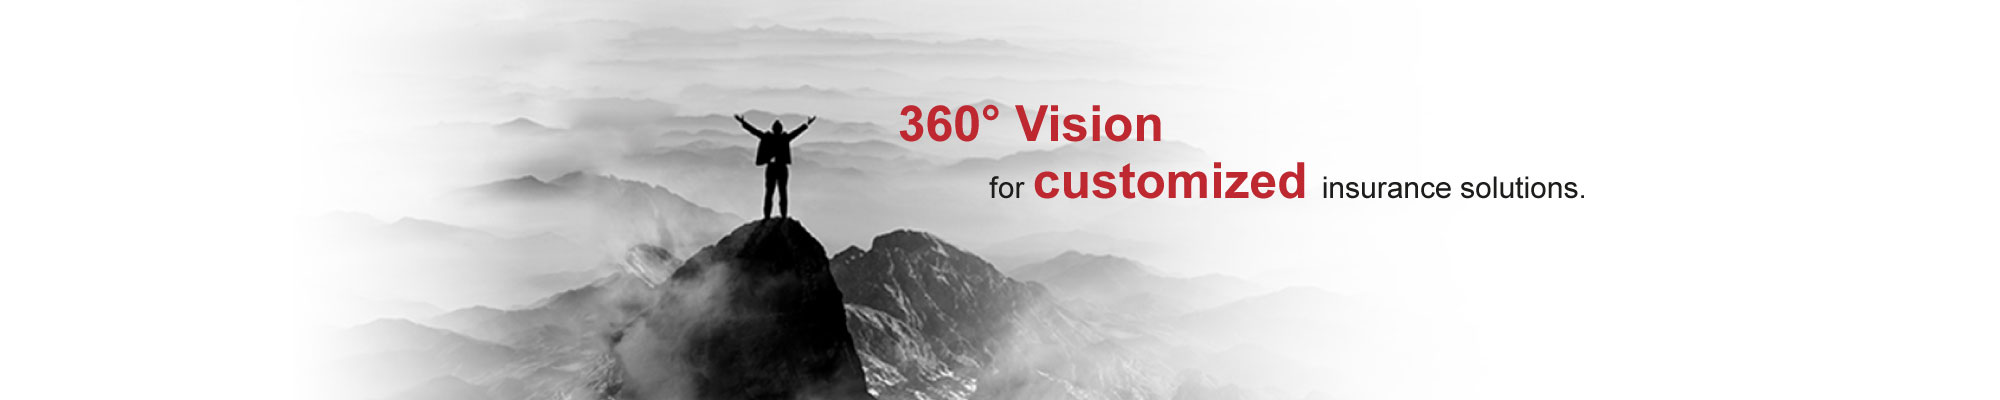 360 degree vision for customized insurance solutions.